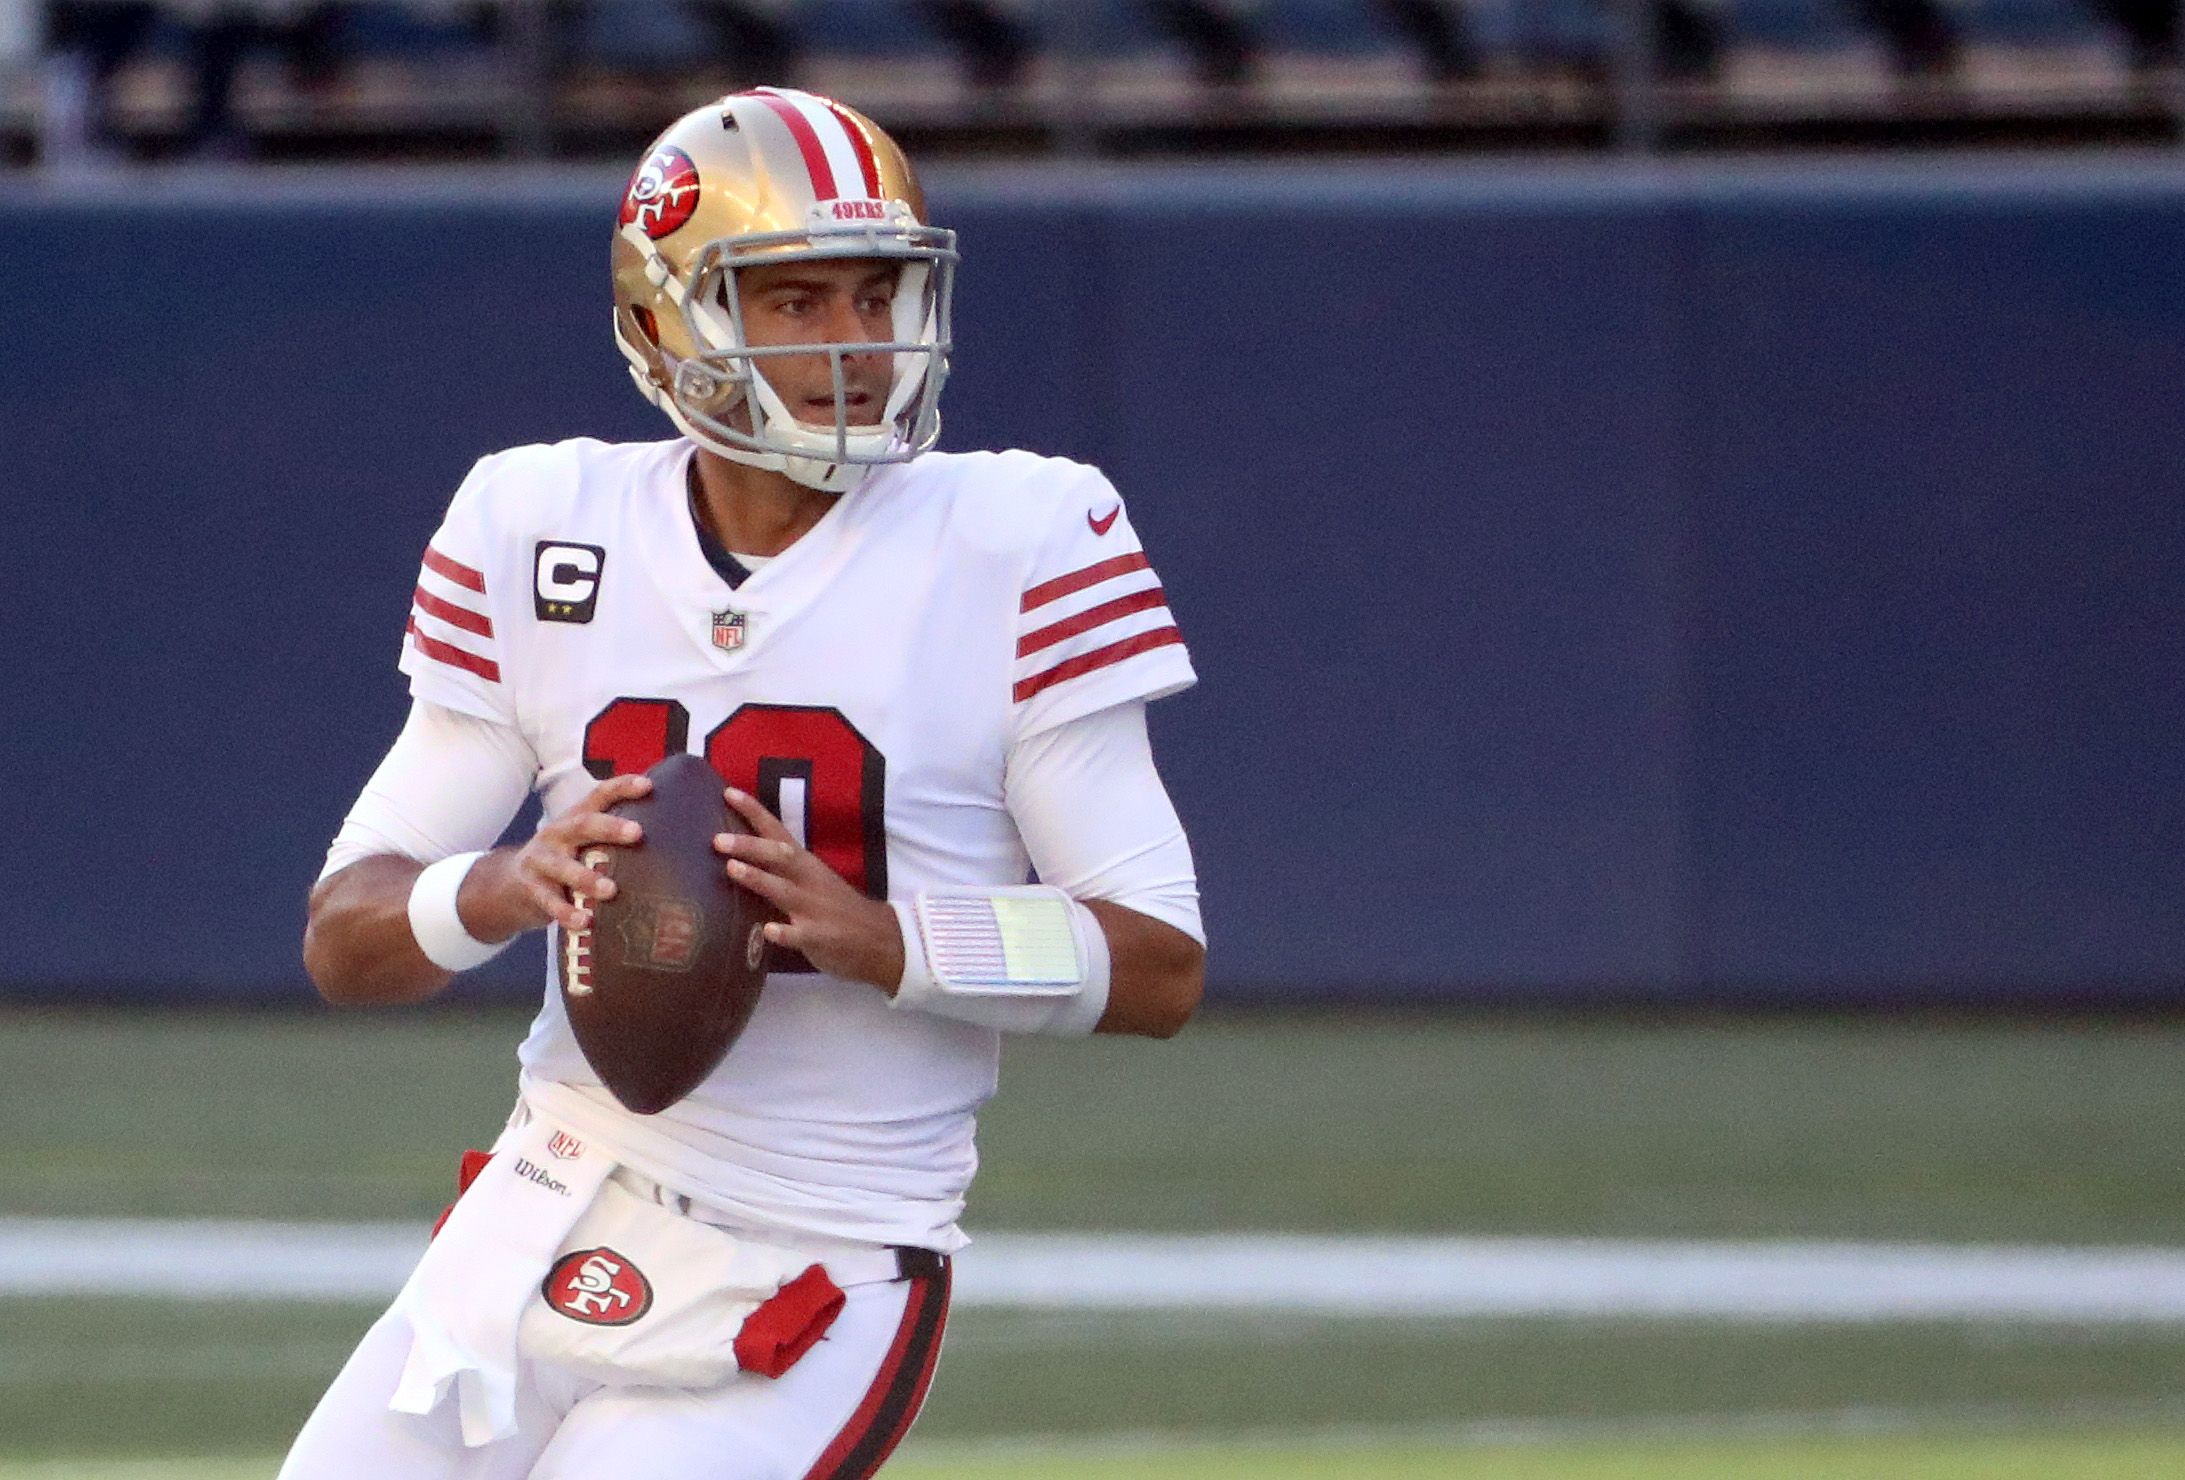 Jimmy Garoppolo prepares to throw a pass in an NFL game.